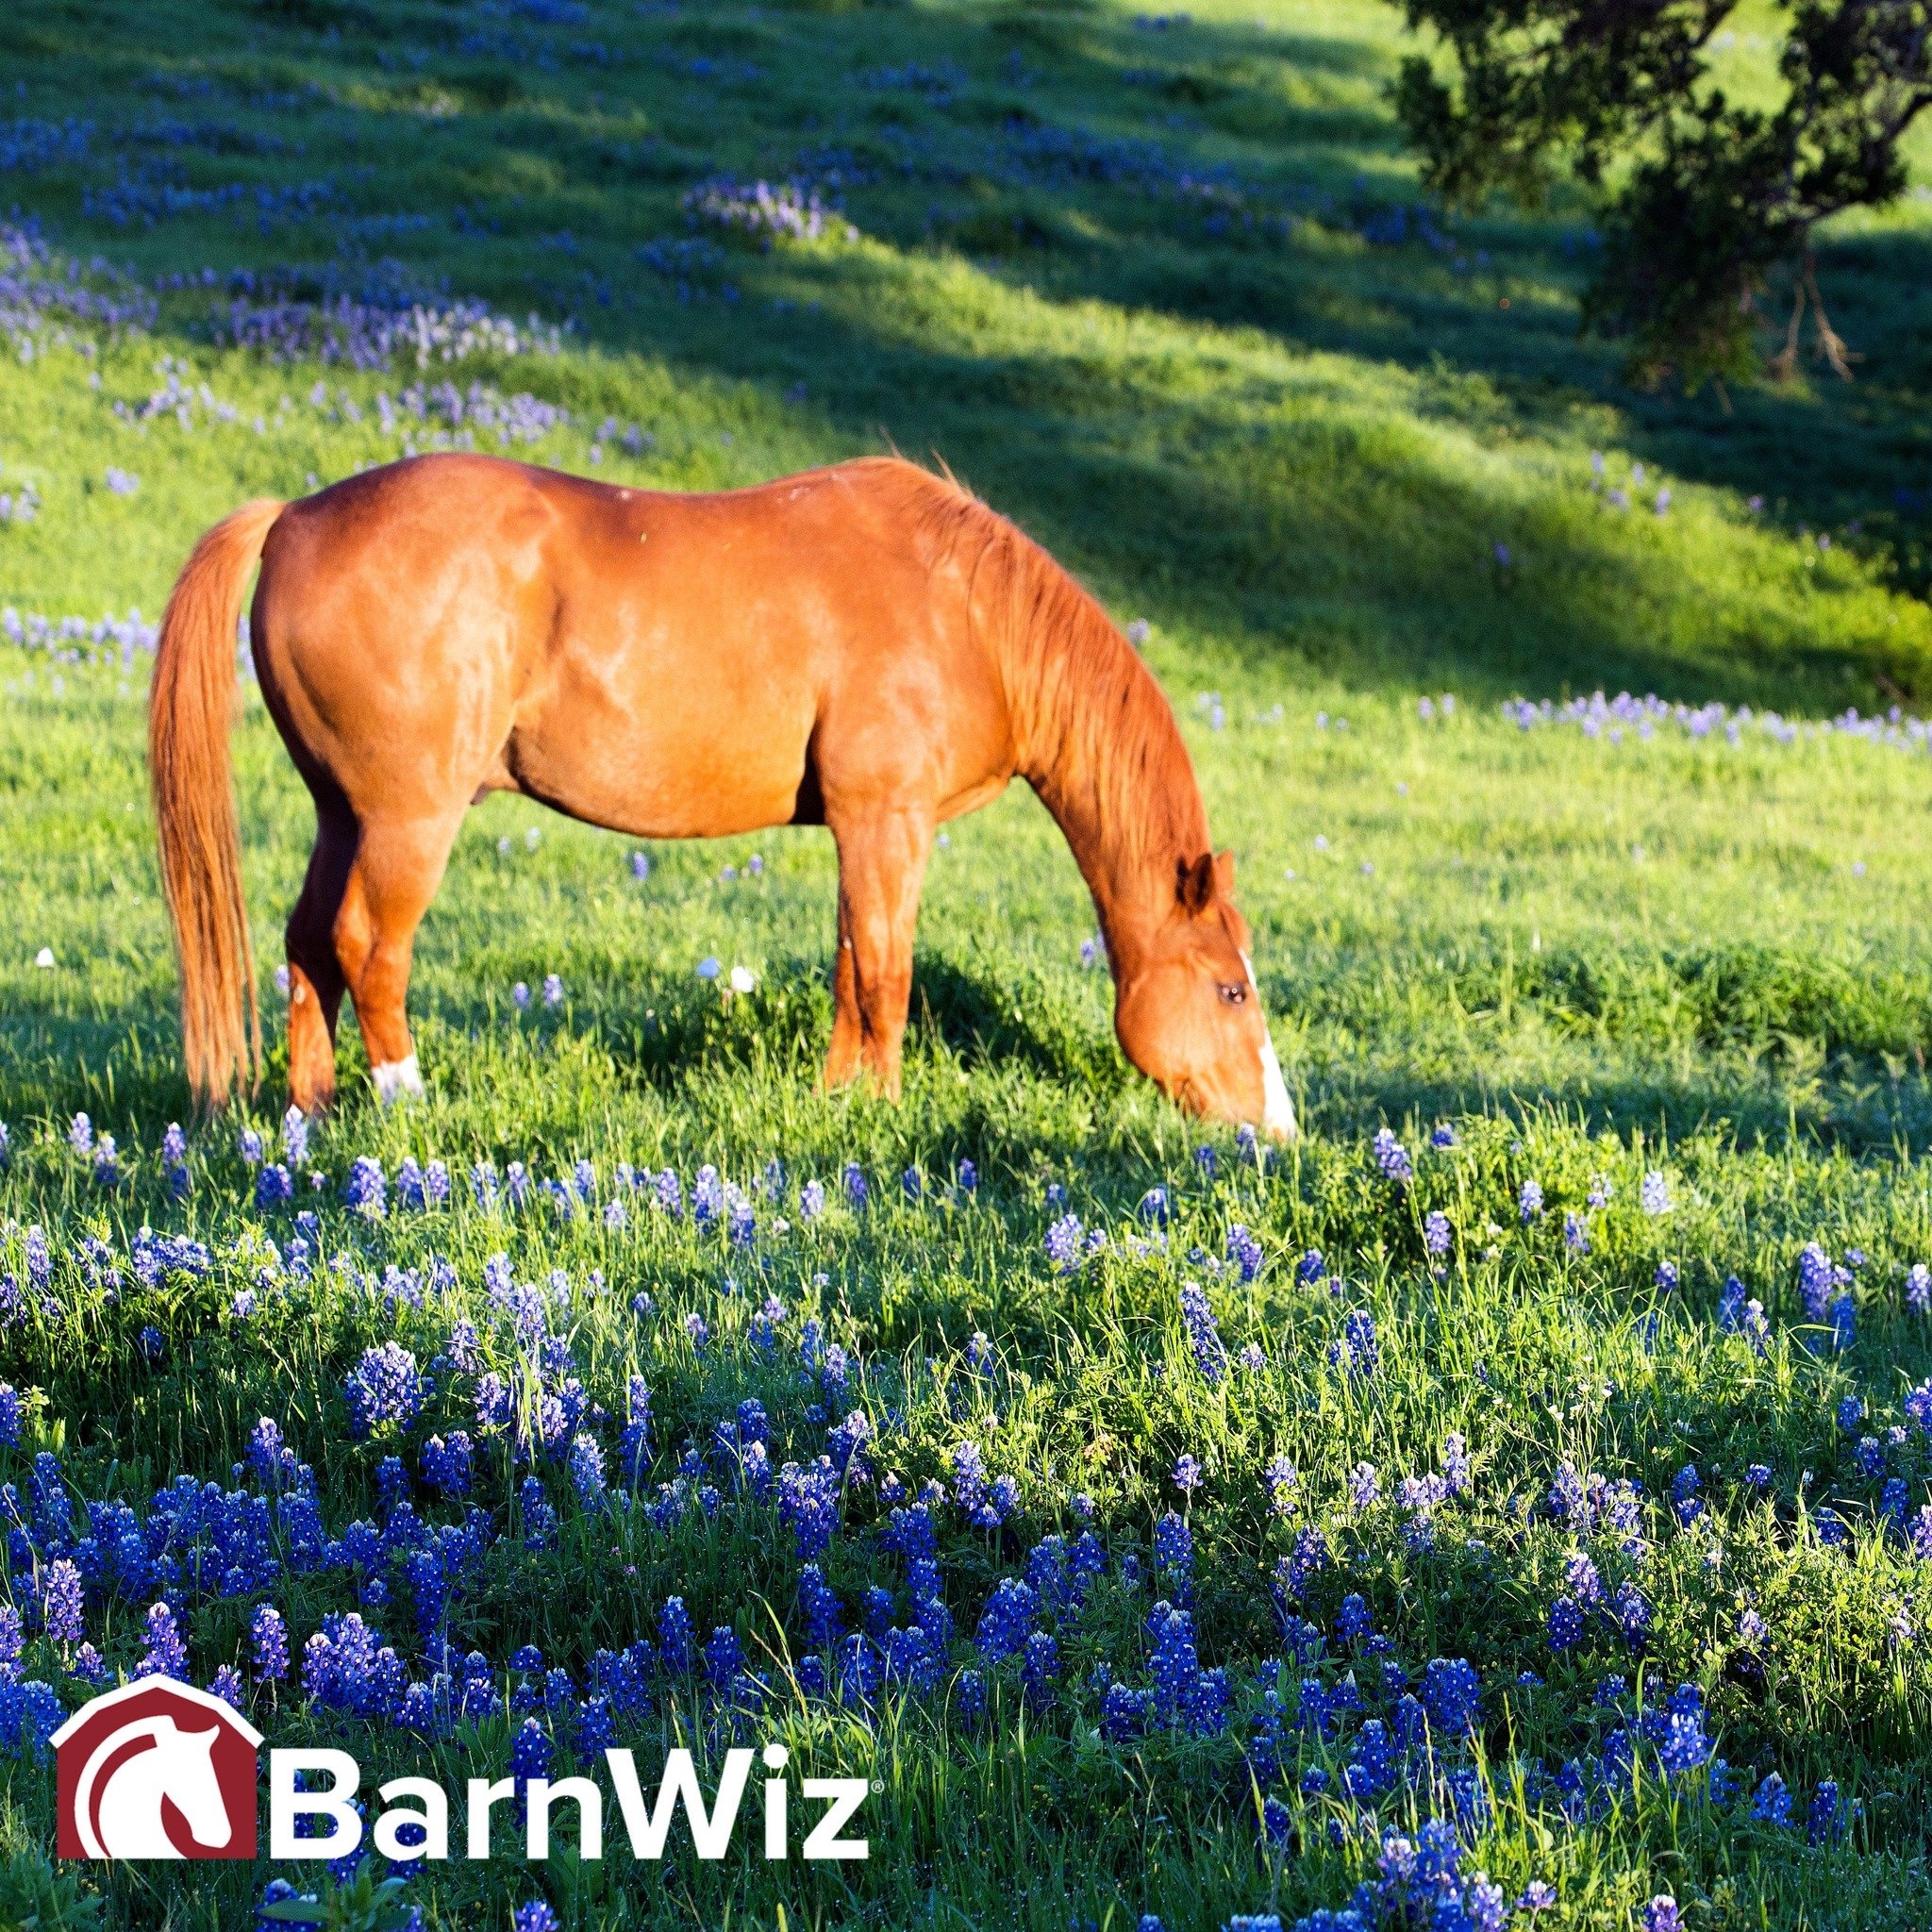 April showers bring May flowers...and mud, skin problems, and loose horseshoes! Read our horse care tips for easing the transition from winter to spring:

https://www.barnwizapp.com/blog/spring-horse-care-five-tips-to-ease-the-seasonal-transition